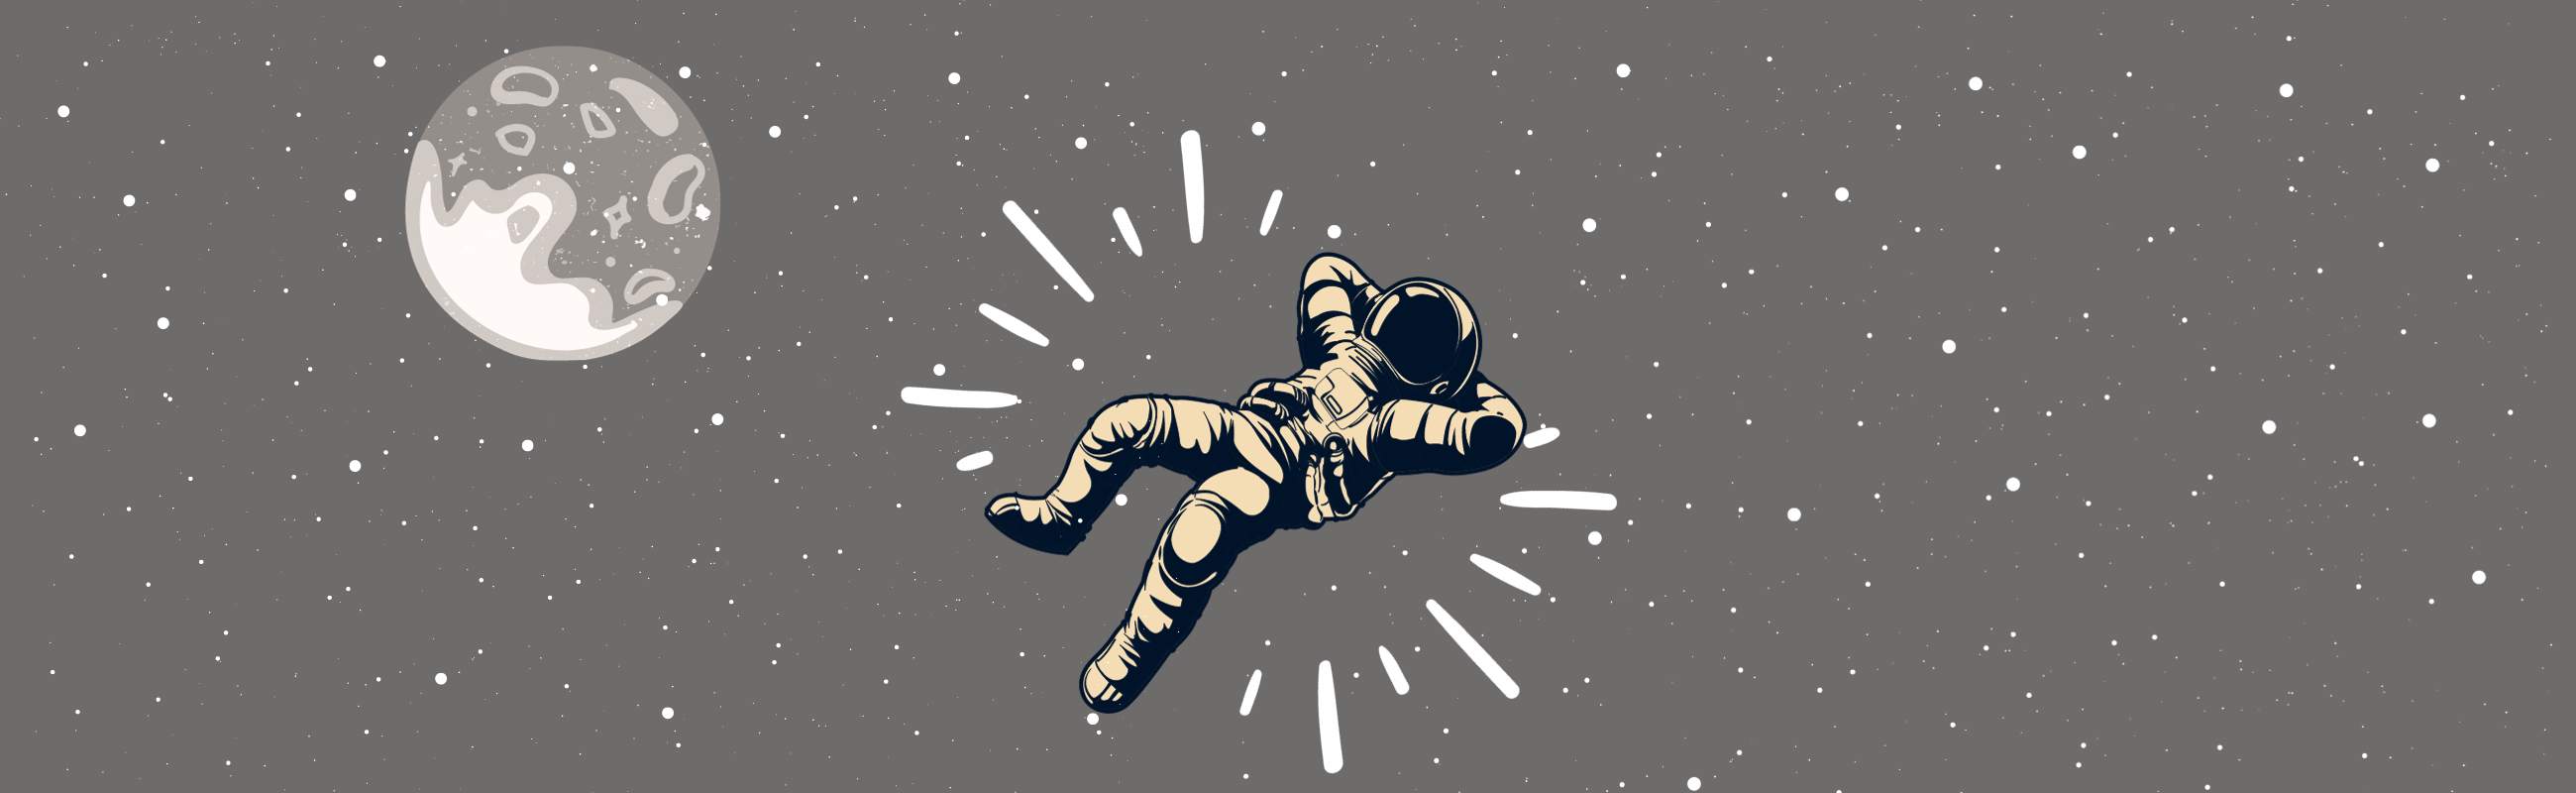 Graphic of astronaut in space